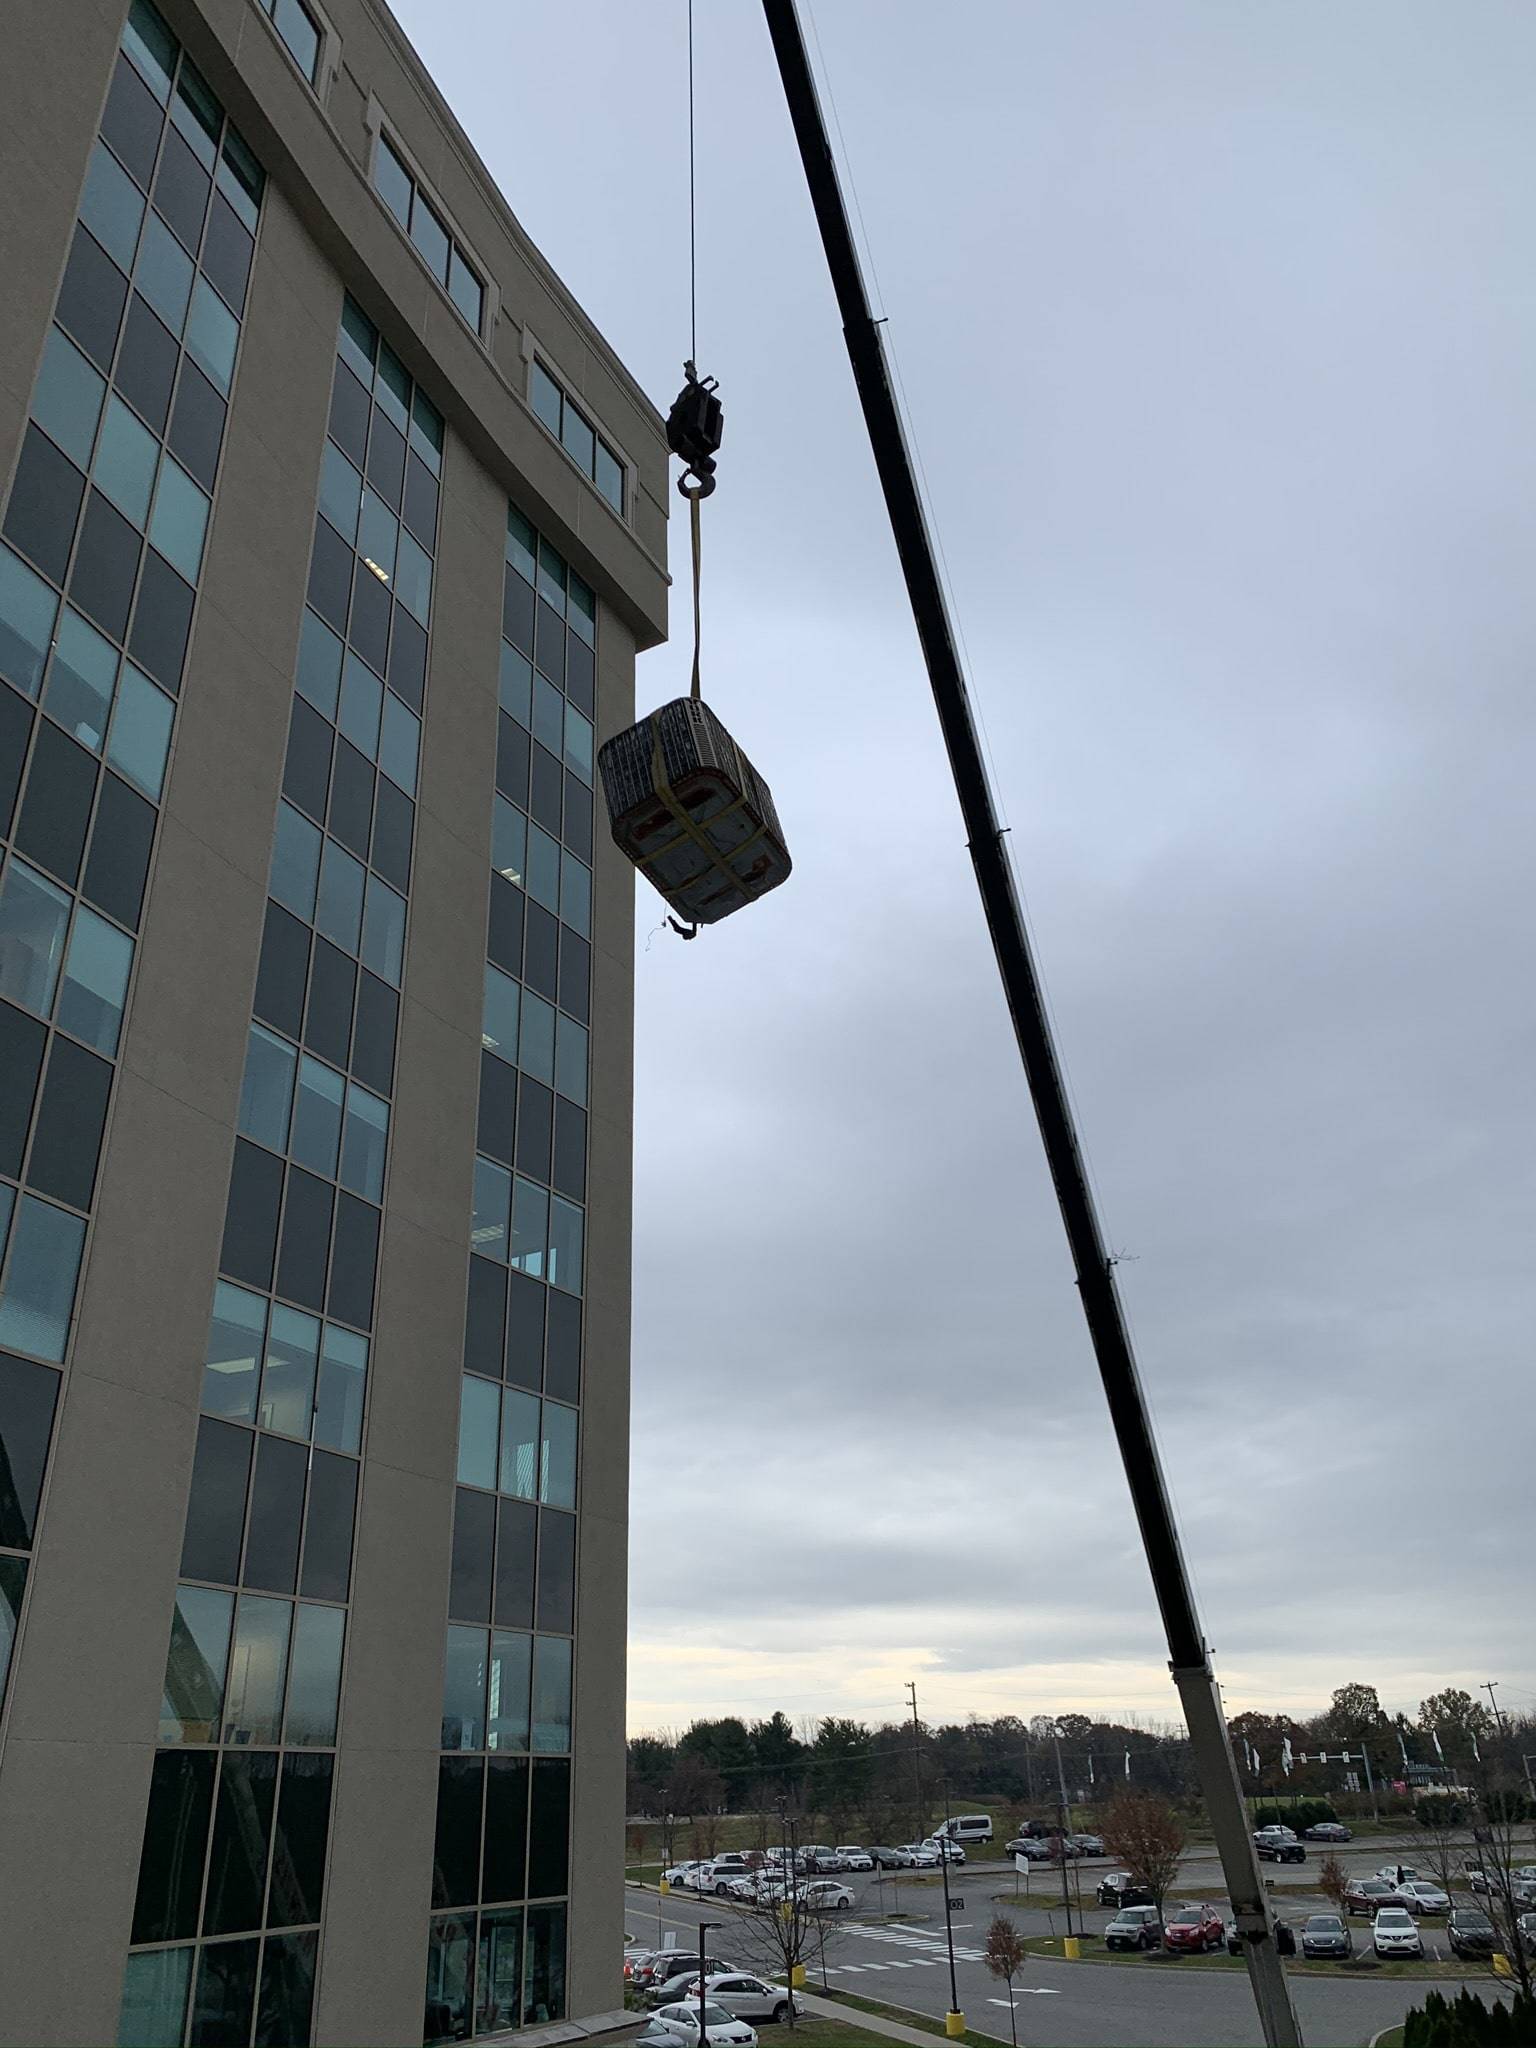 The product is lifted up using a crane